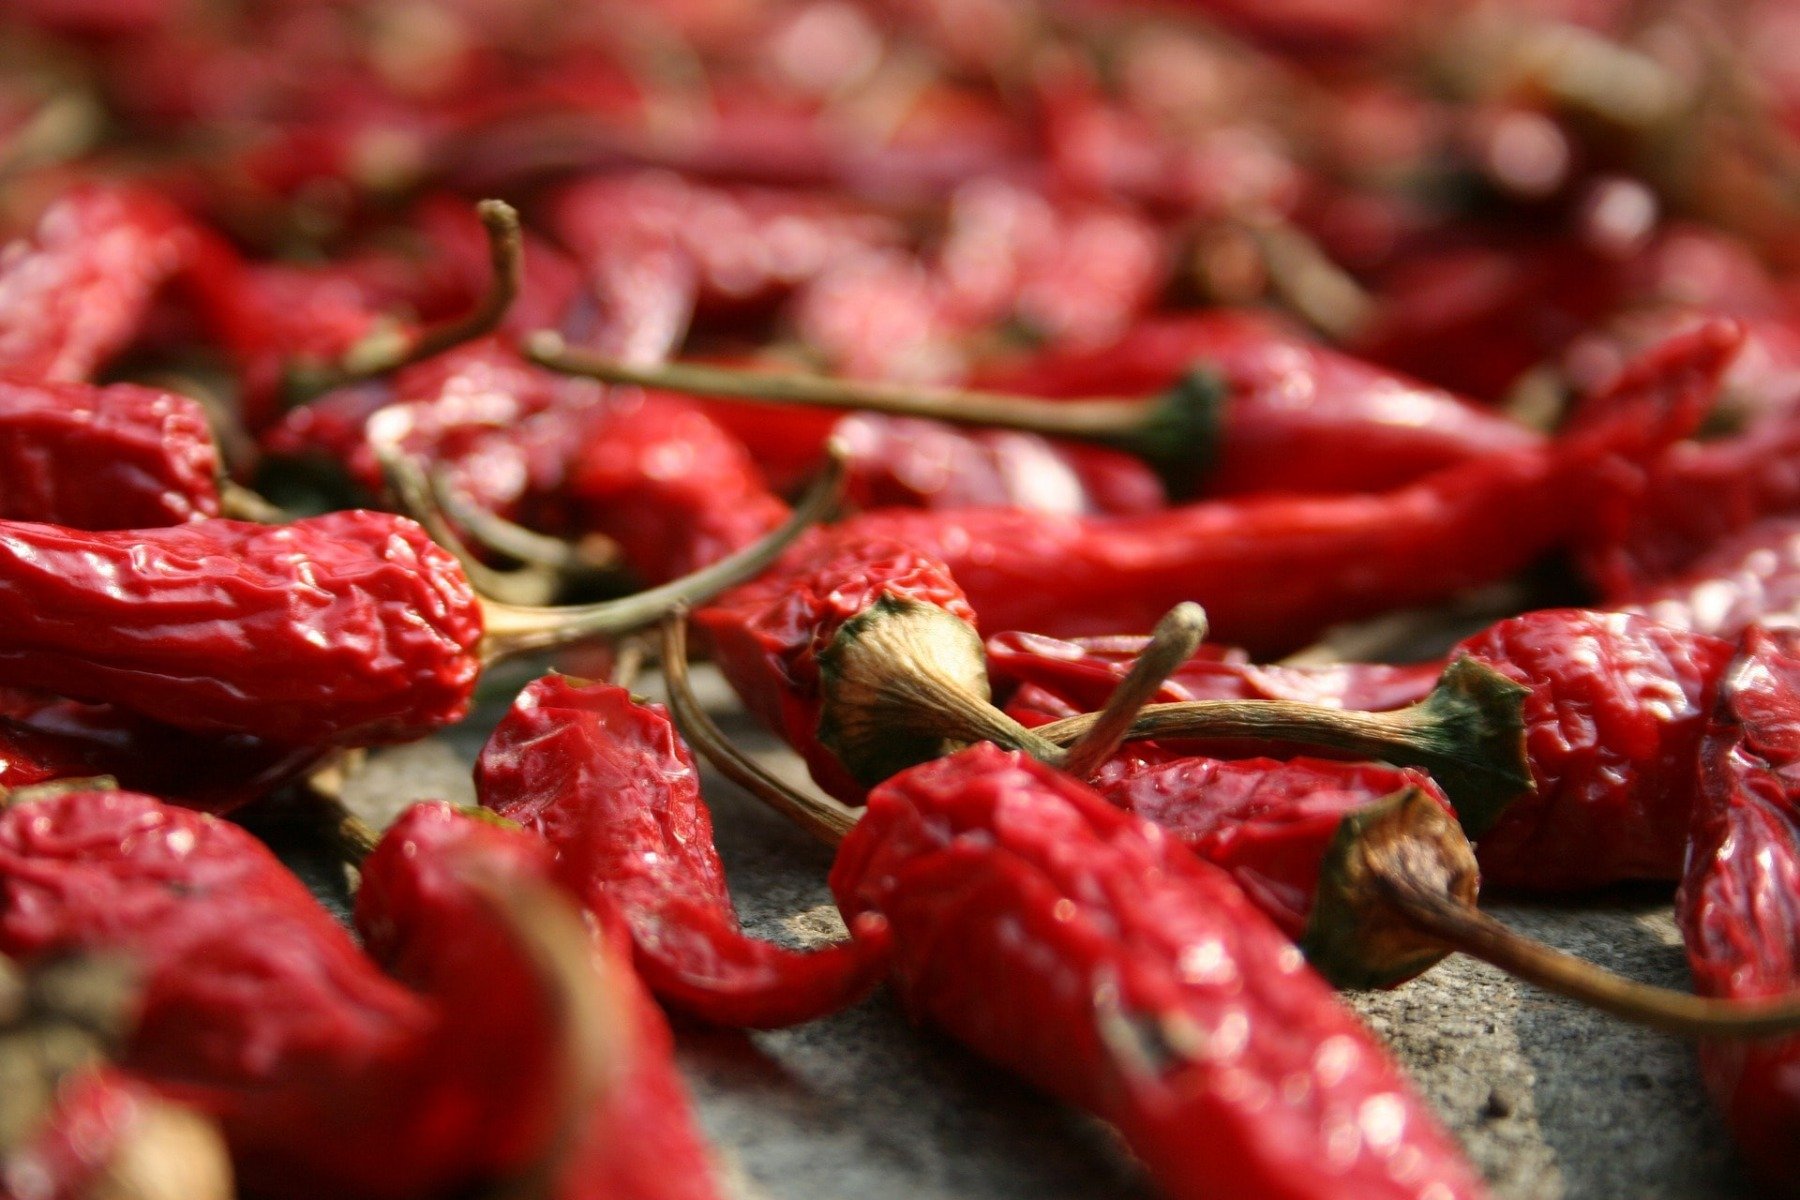 Capsaicin - a component of chili peppers